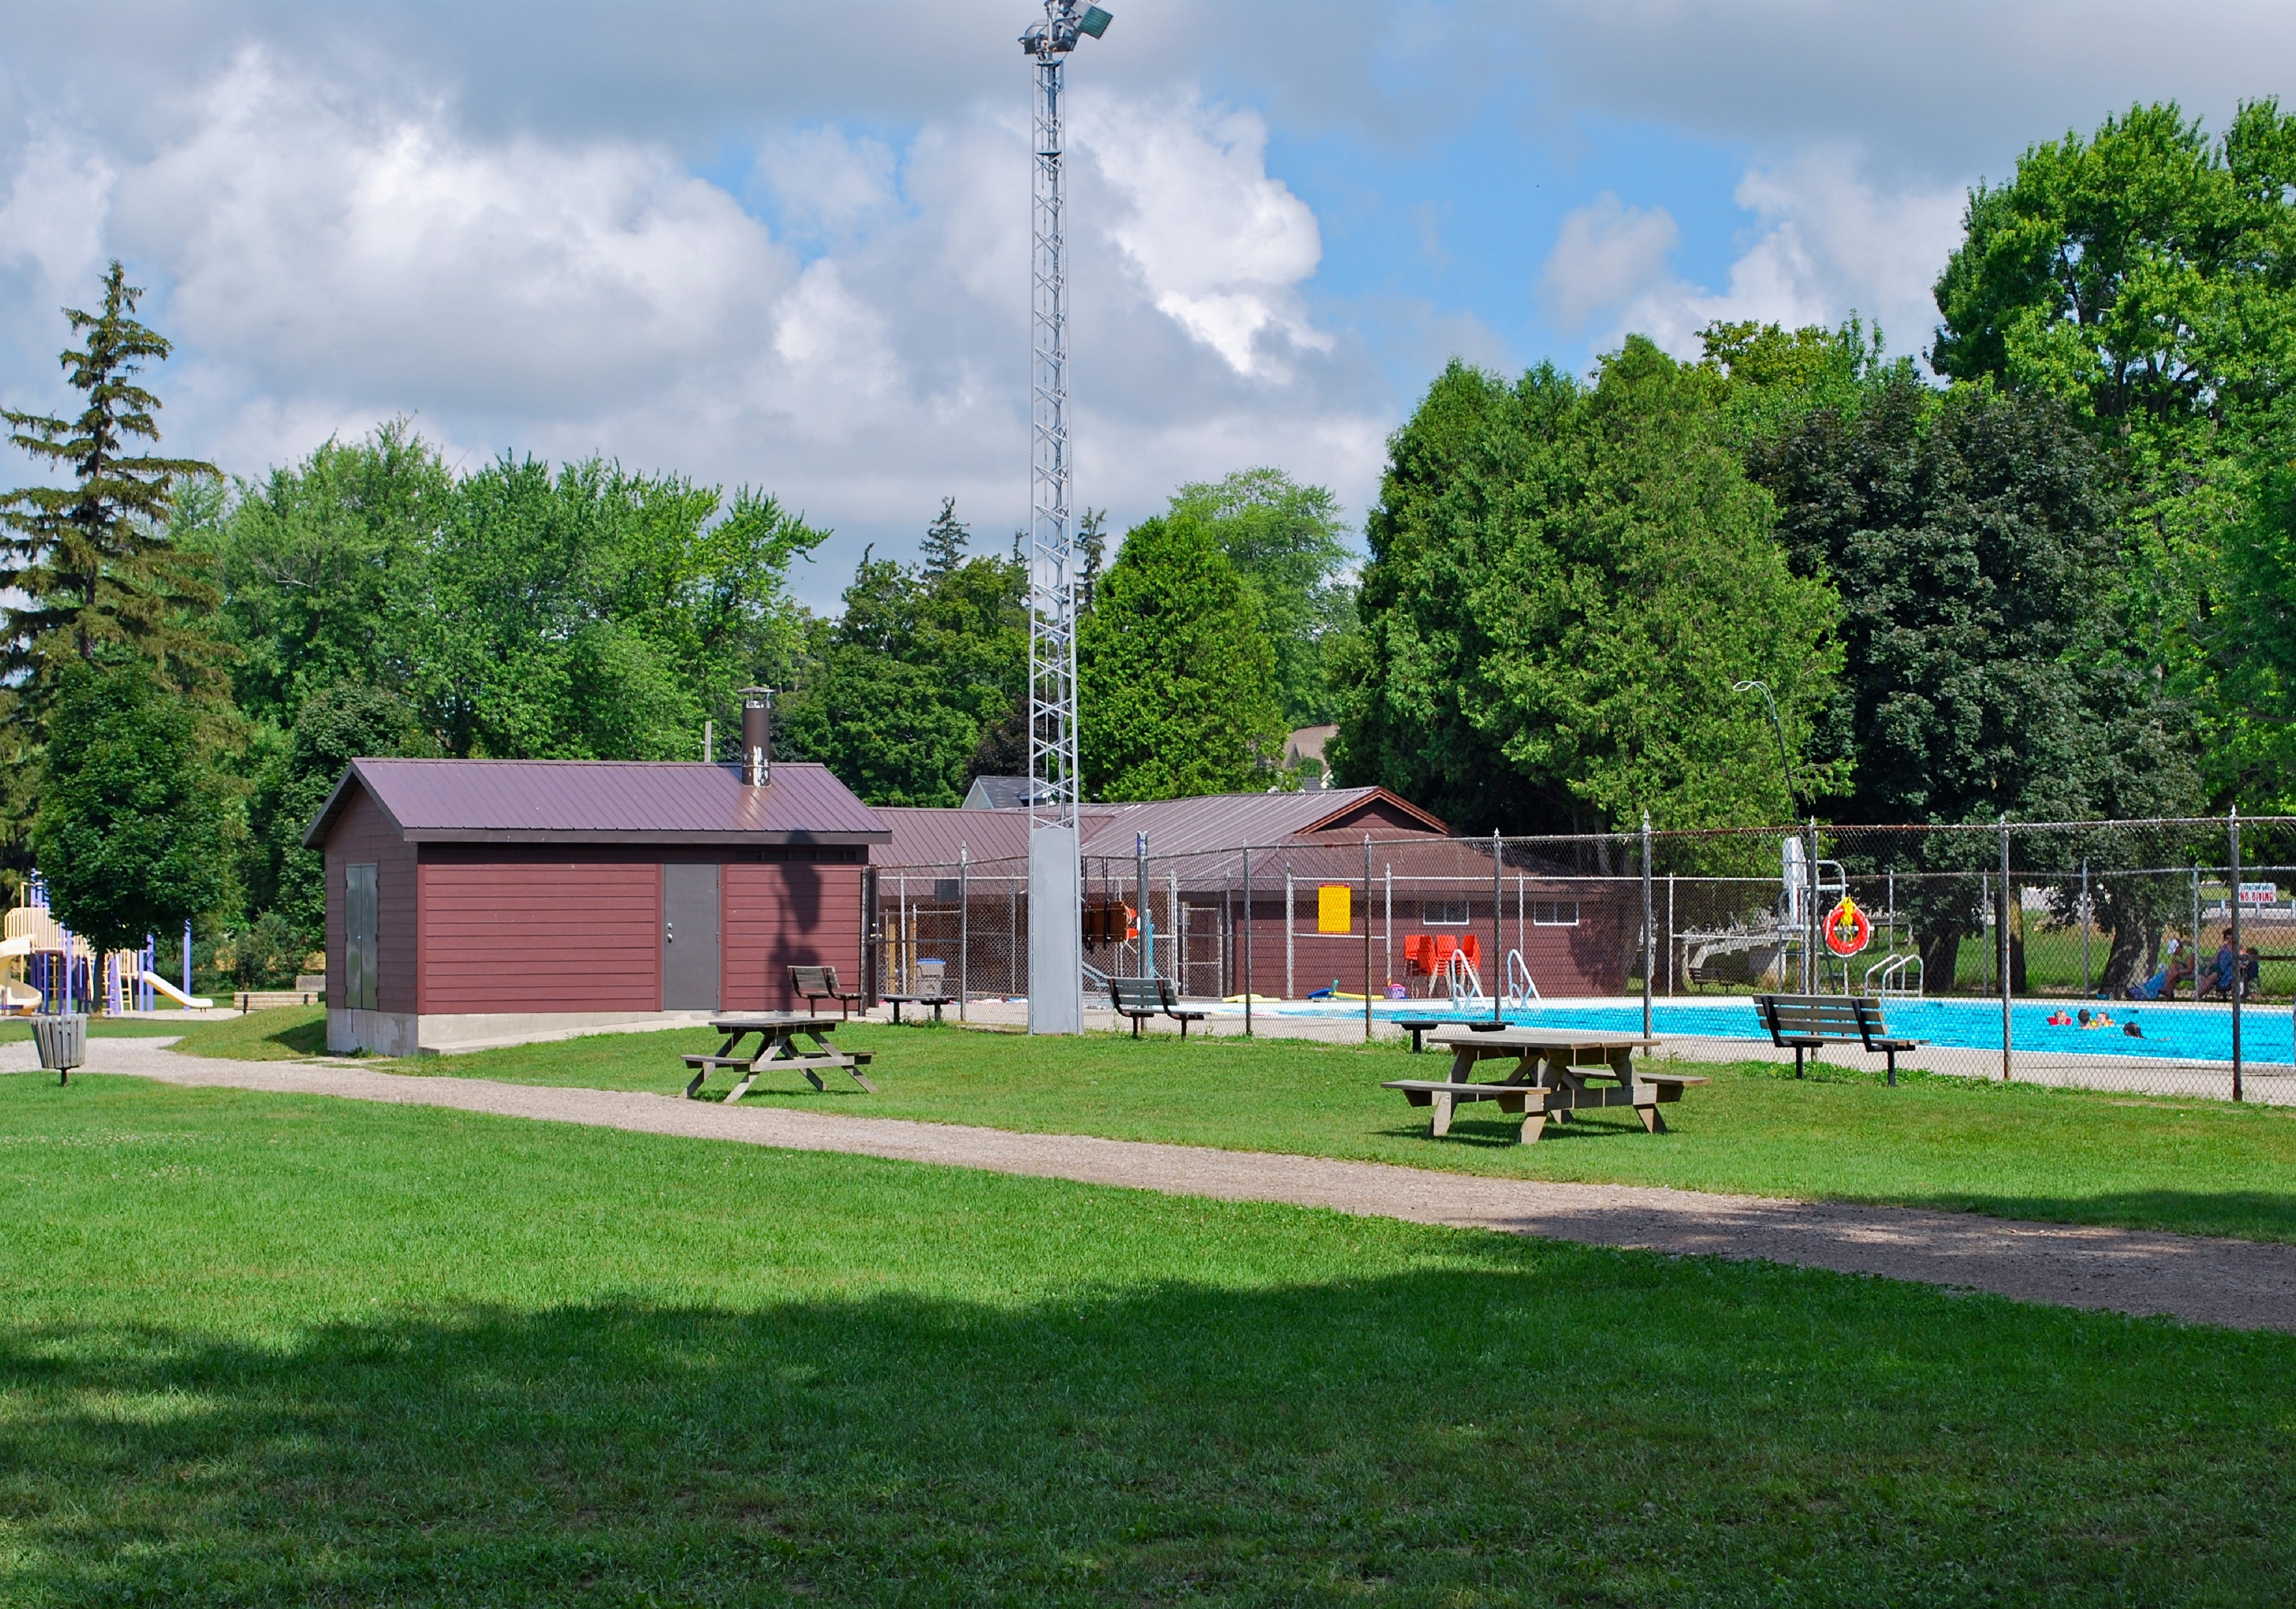 A picture of the pool at the Seaforth Lions Park.